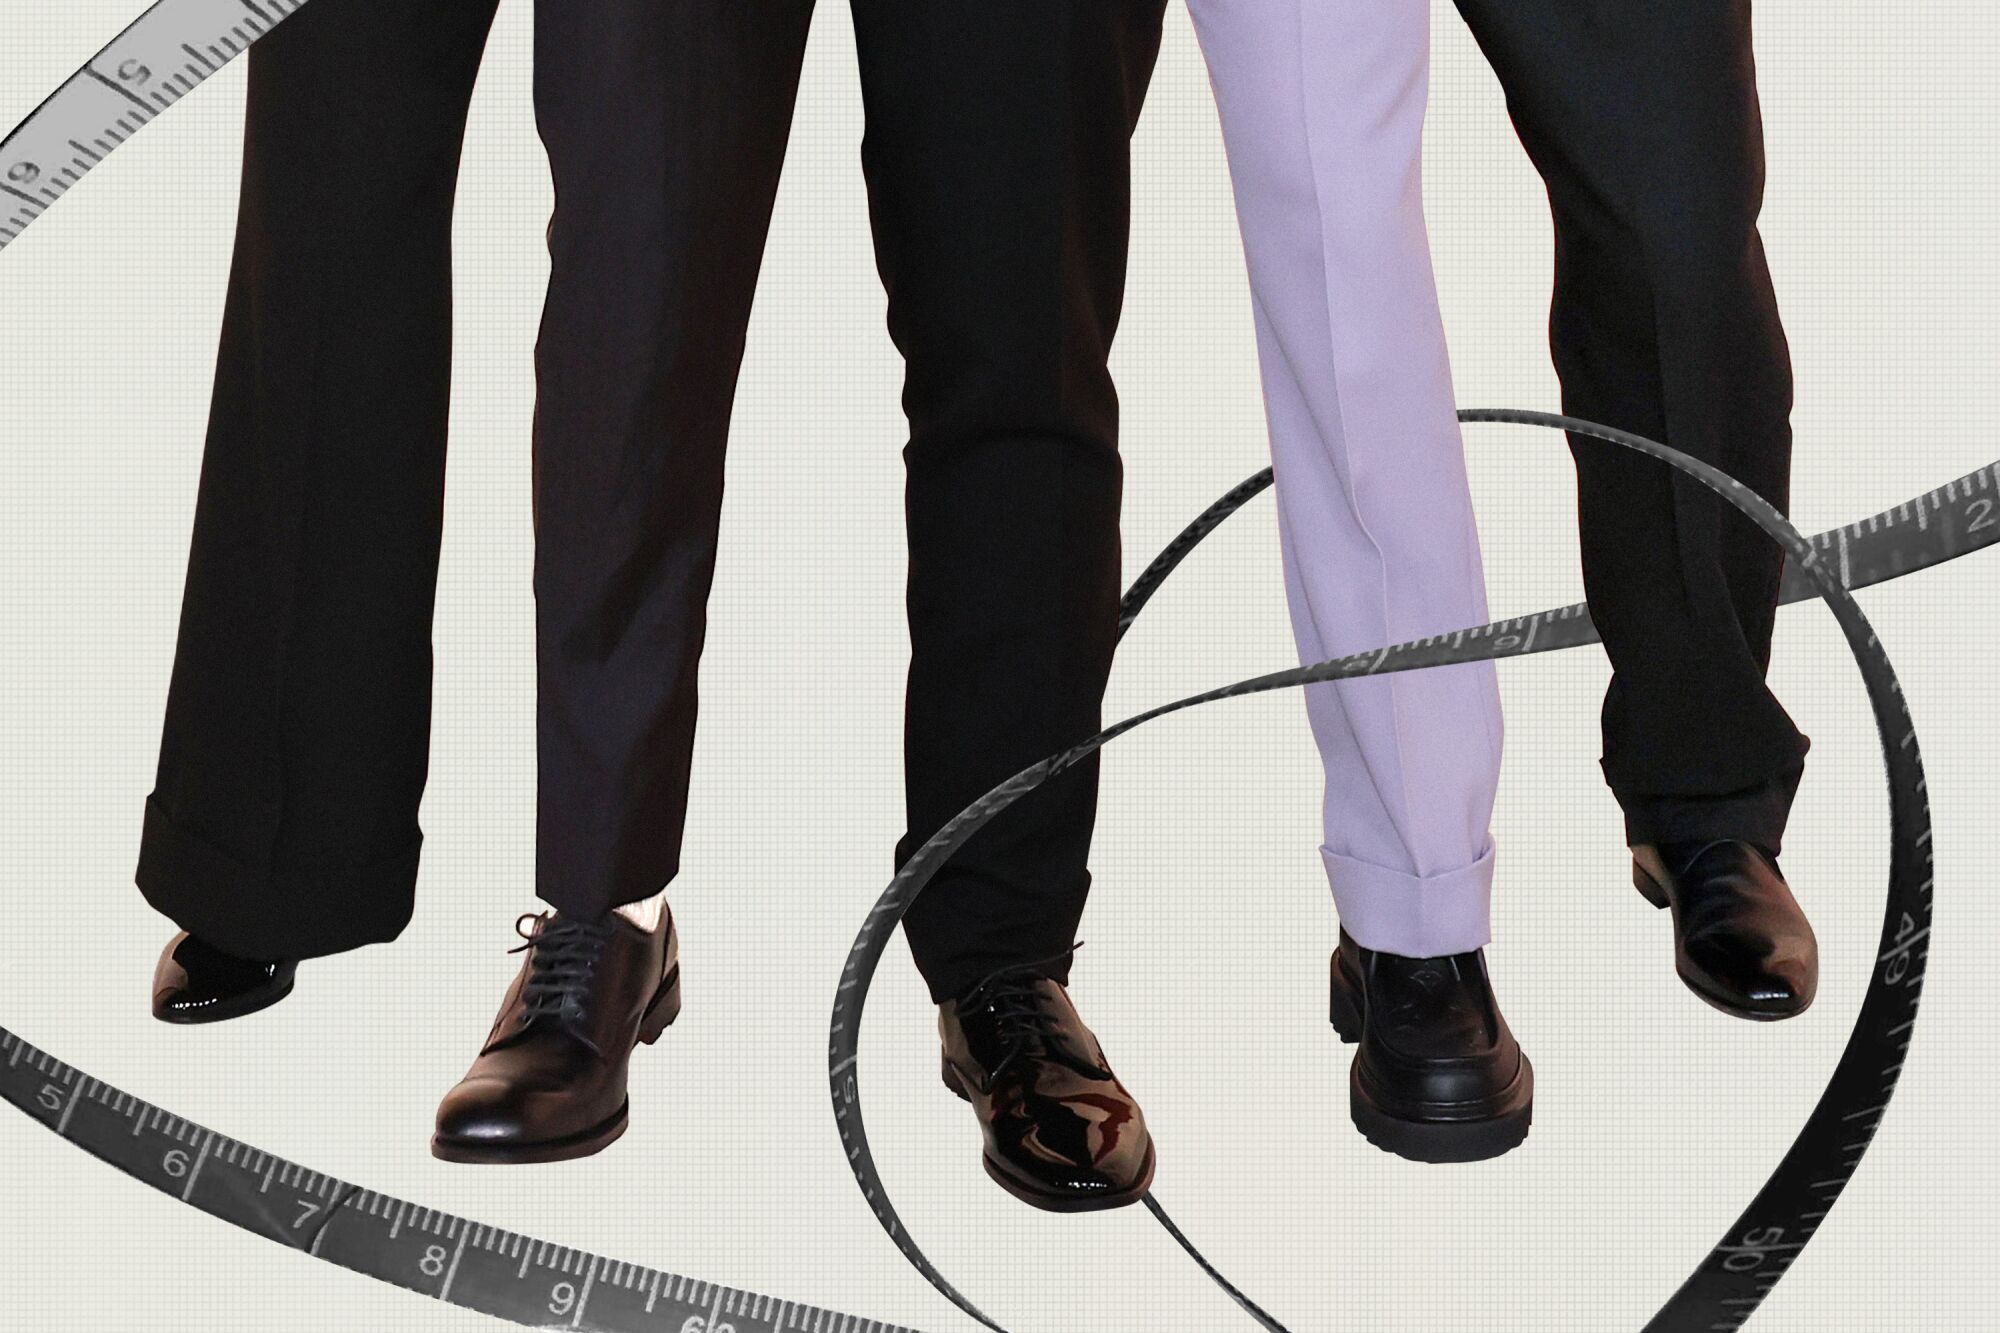 four black pant legs and one purple pant leg surrounded by a swirl of measuring tape